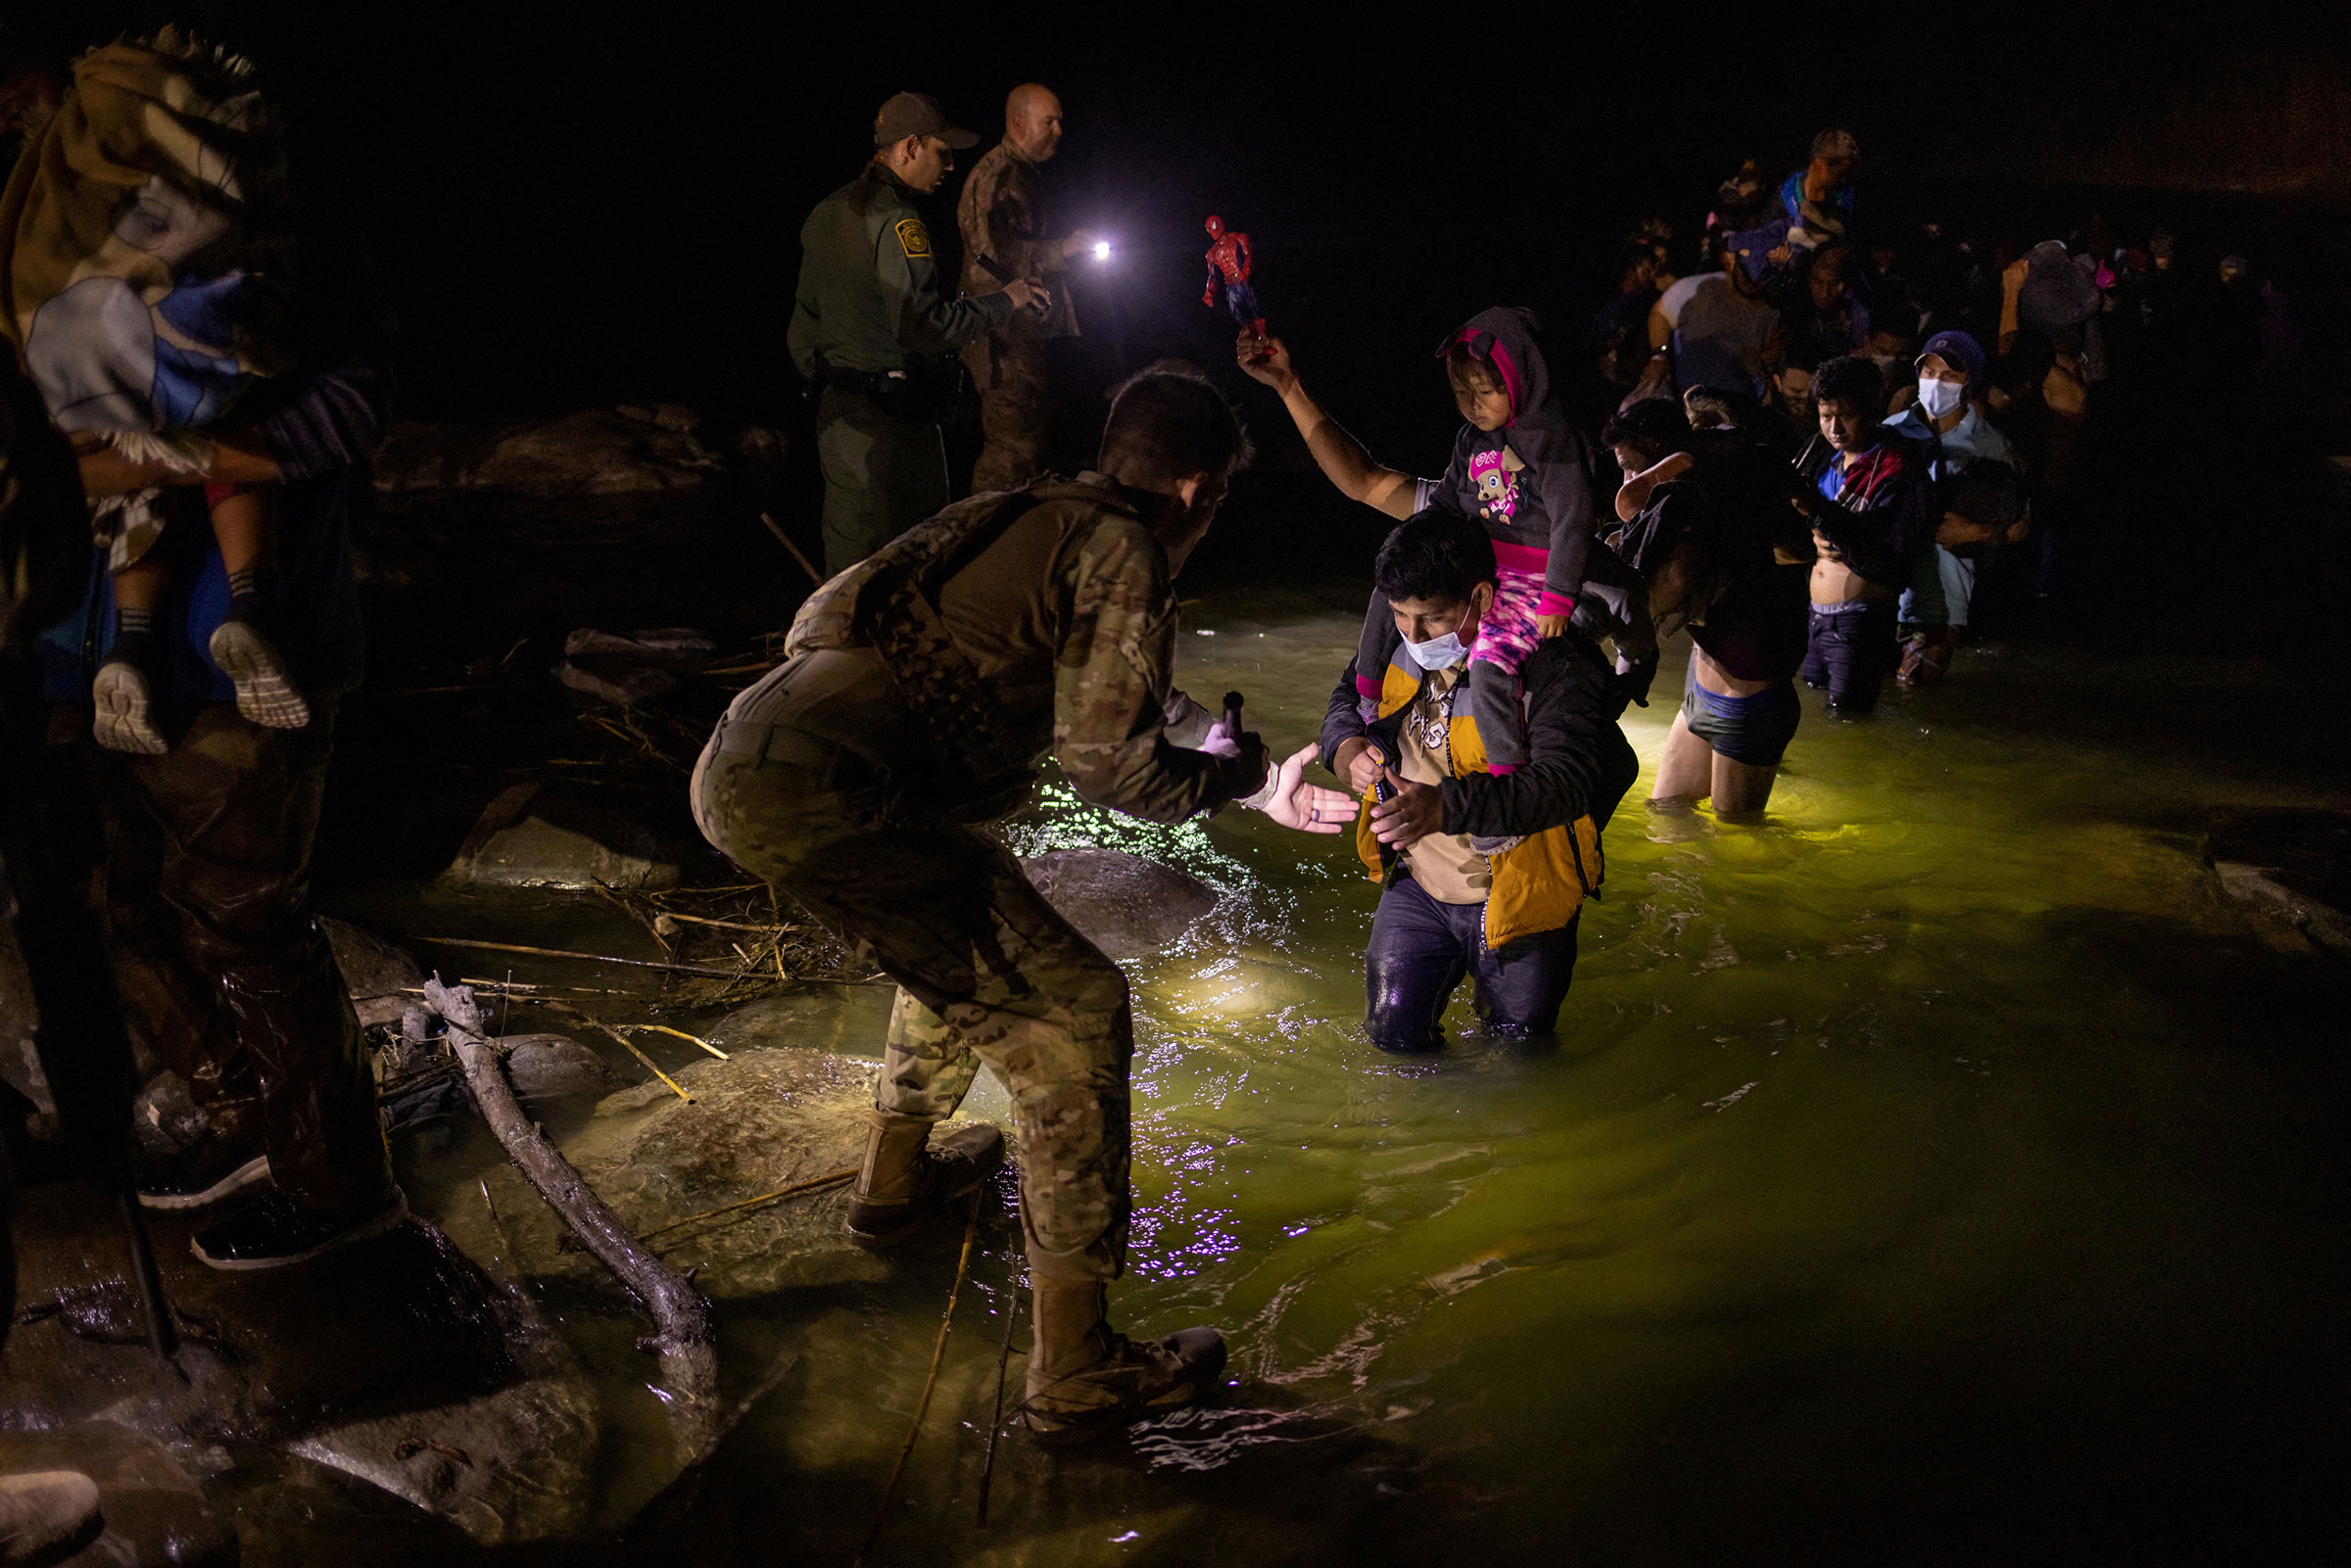 Border patrol agents and members of the Texas Army National Guard light the path as asylum-seeking migrants from Central and South America wade through the Rio Grande river into the United States from Mexico, in Roma, Texas, on March 4. (Adrees Latif—Reuters)